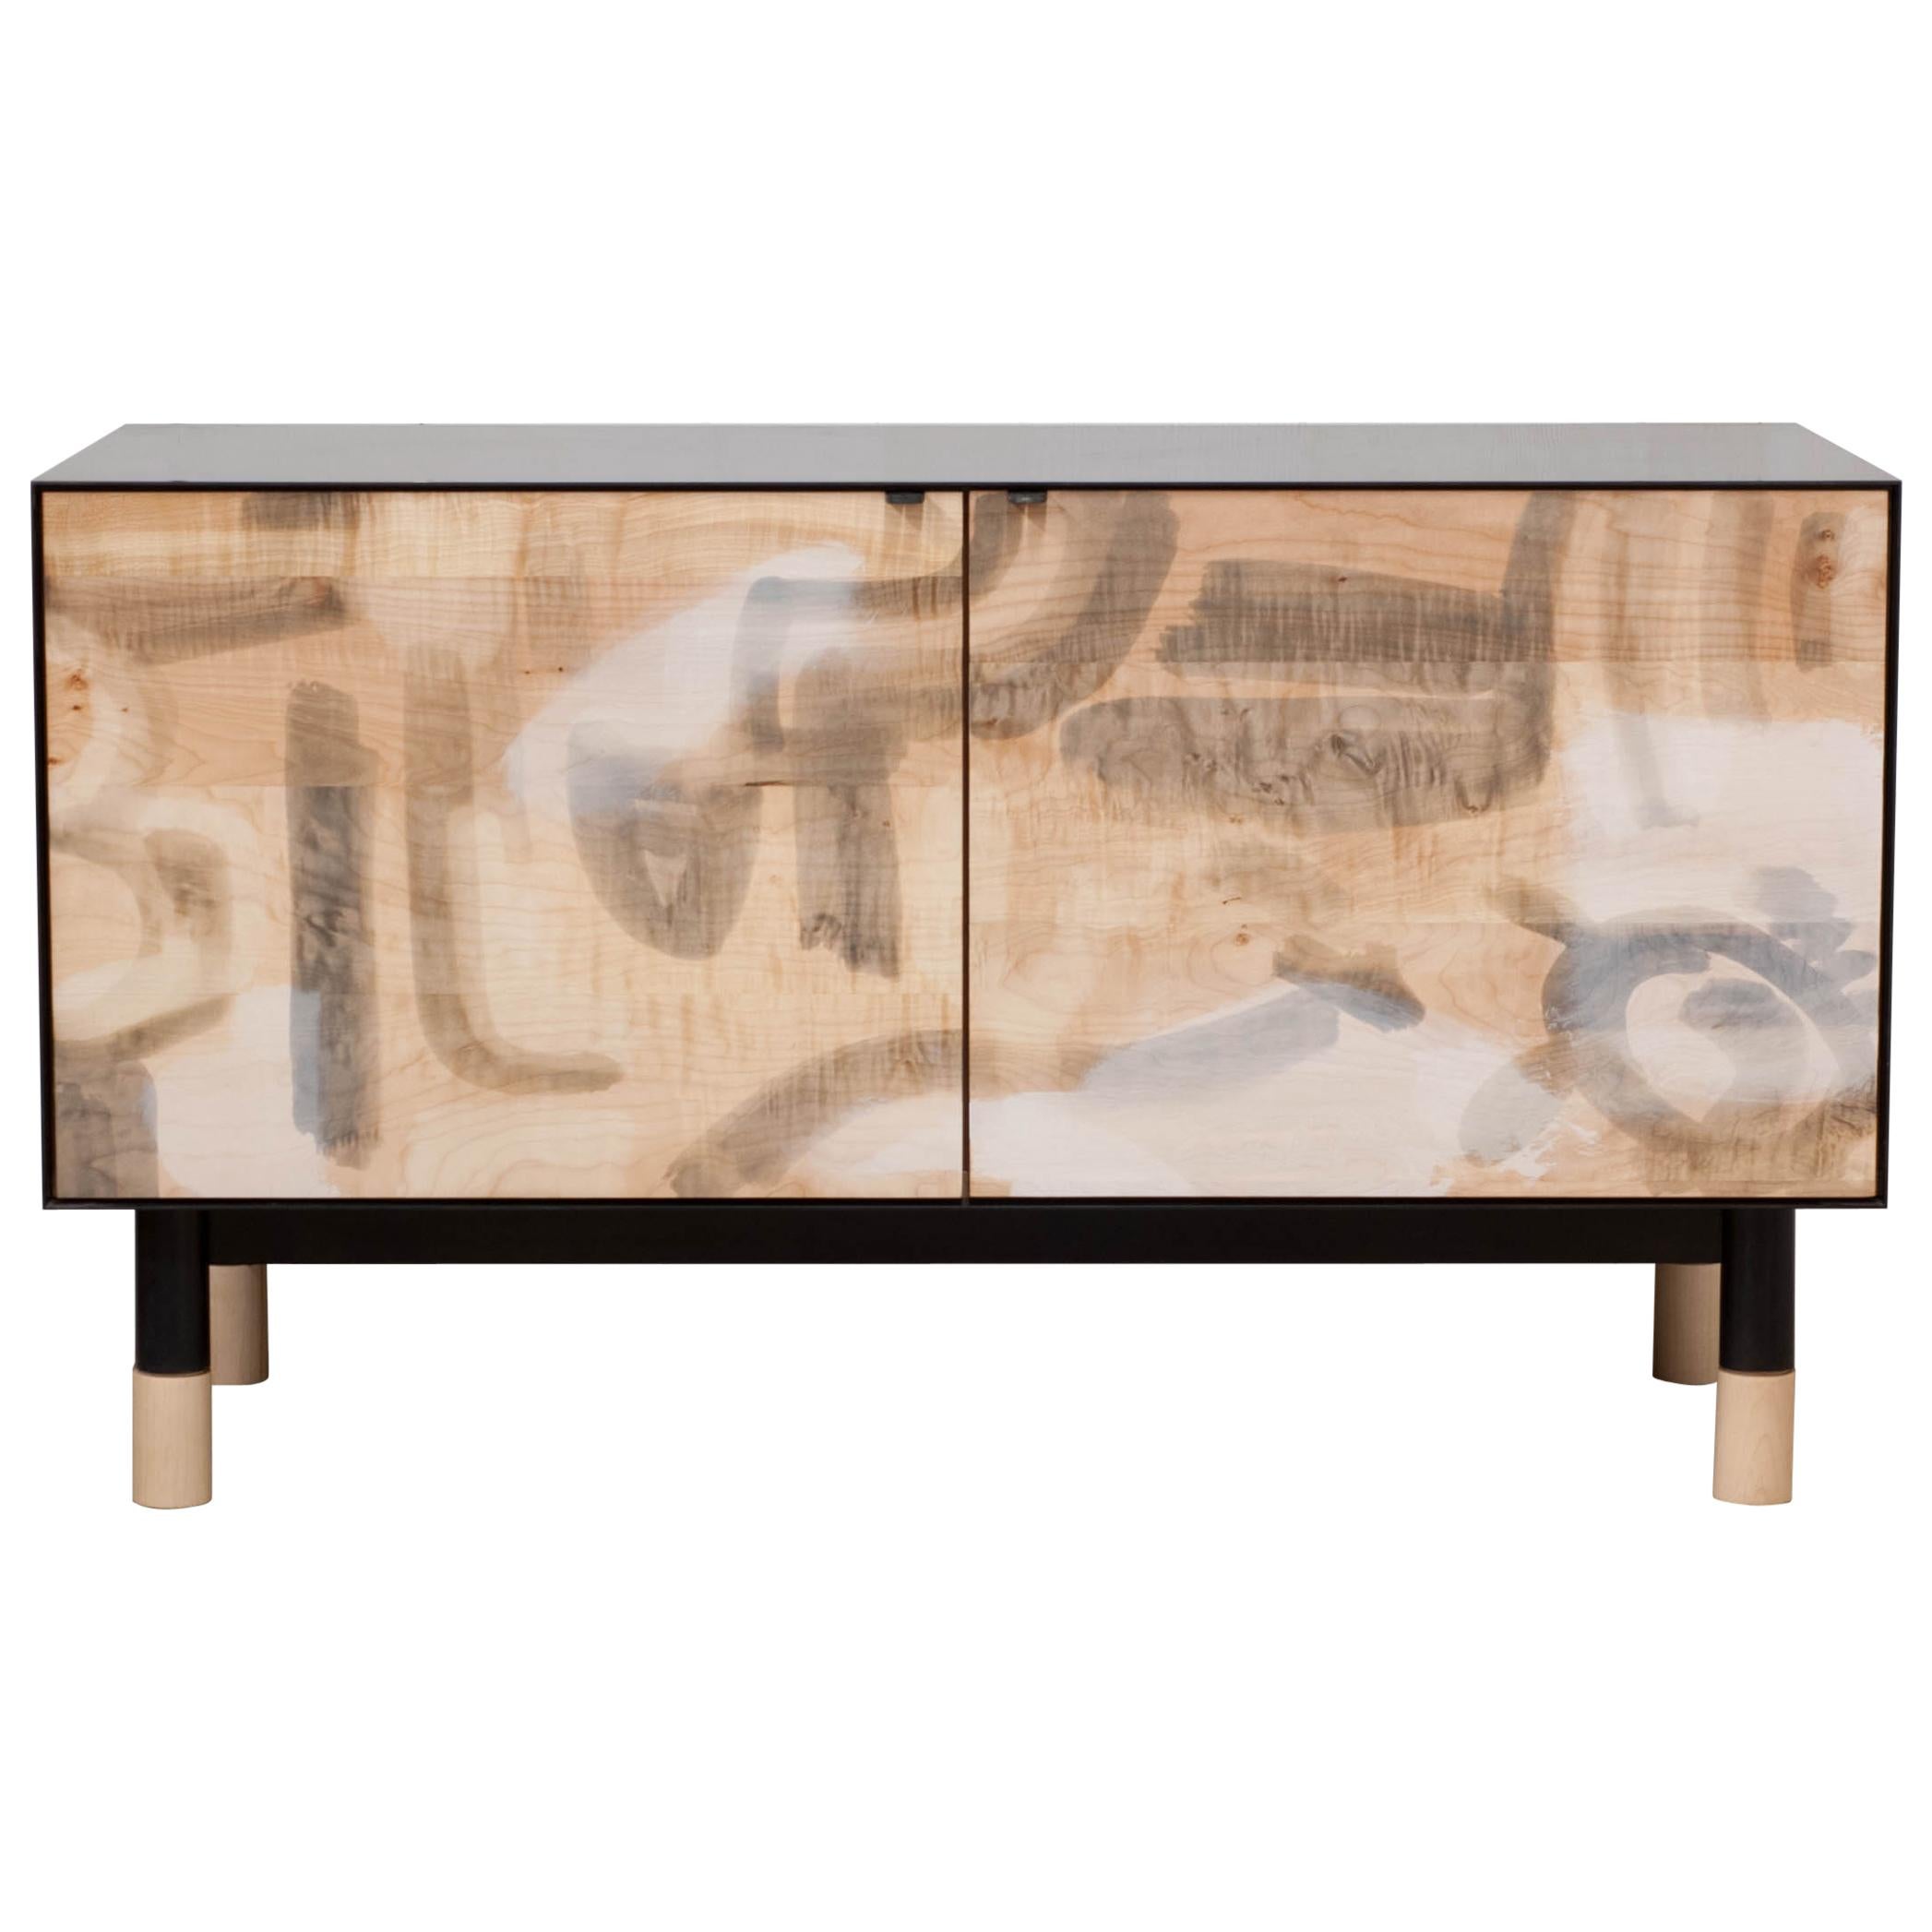 Painted Credenza with Blackened Steel Case